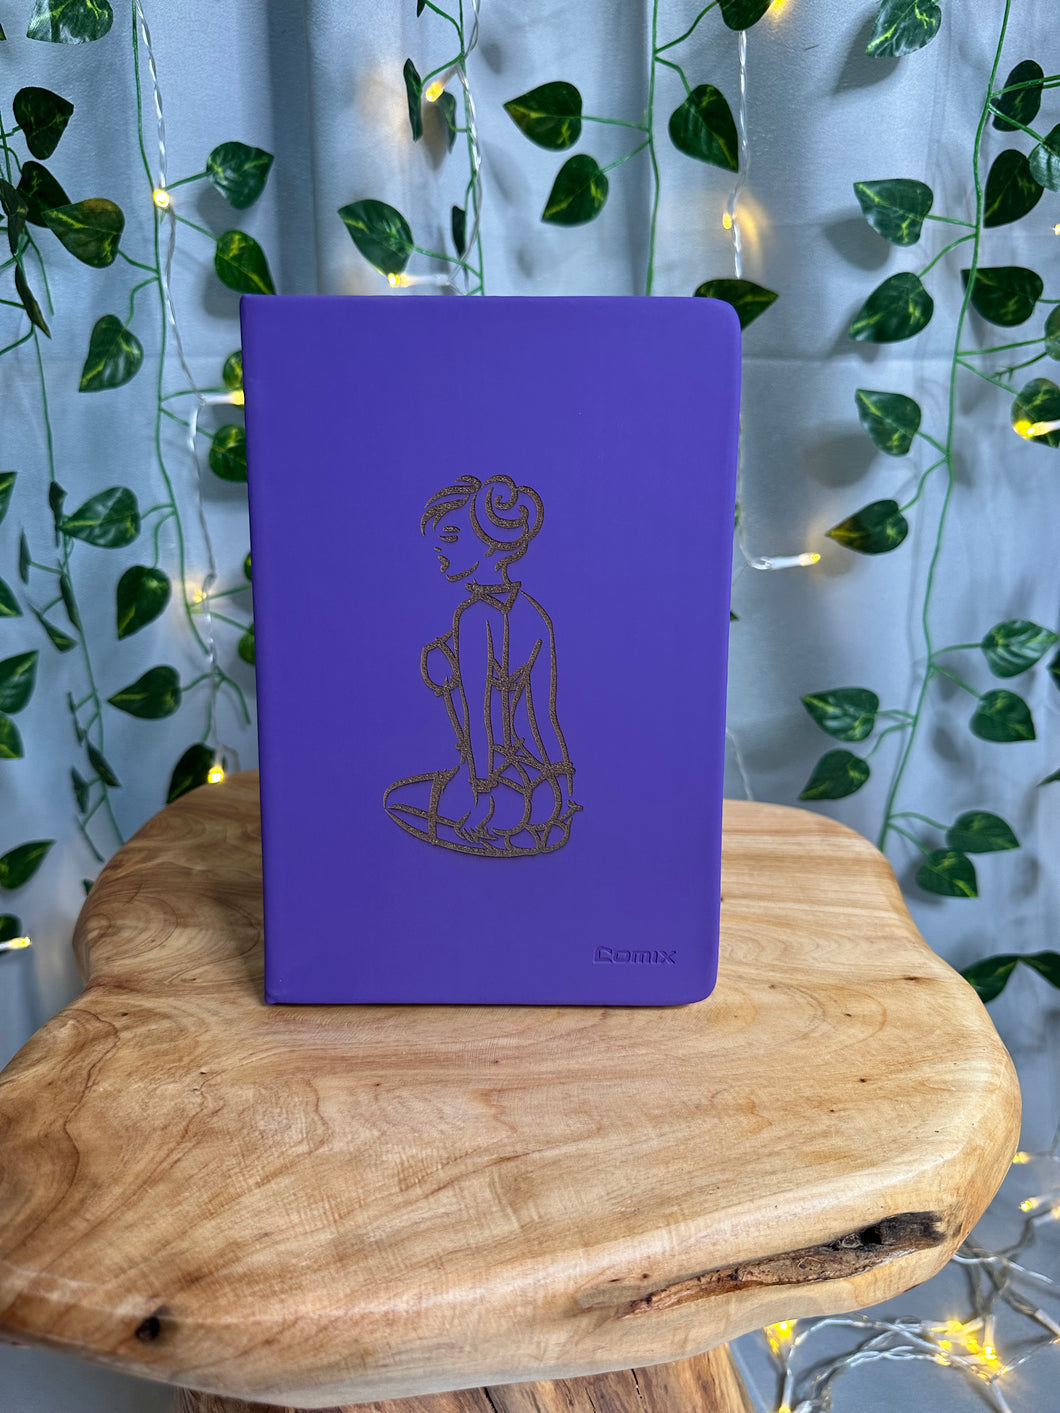 BDSM Submissive Women Purple Notebook - Ruled 8.25